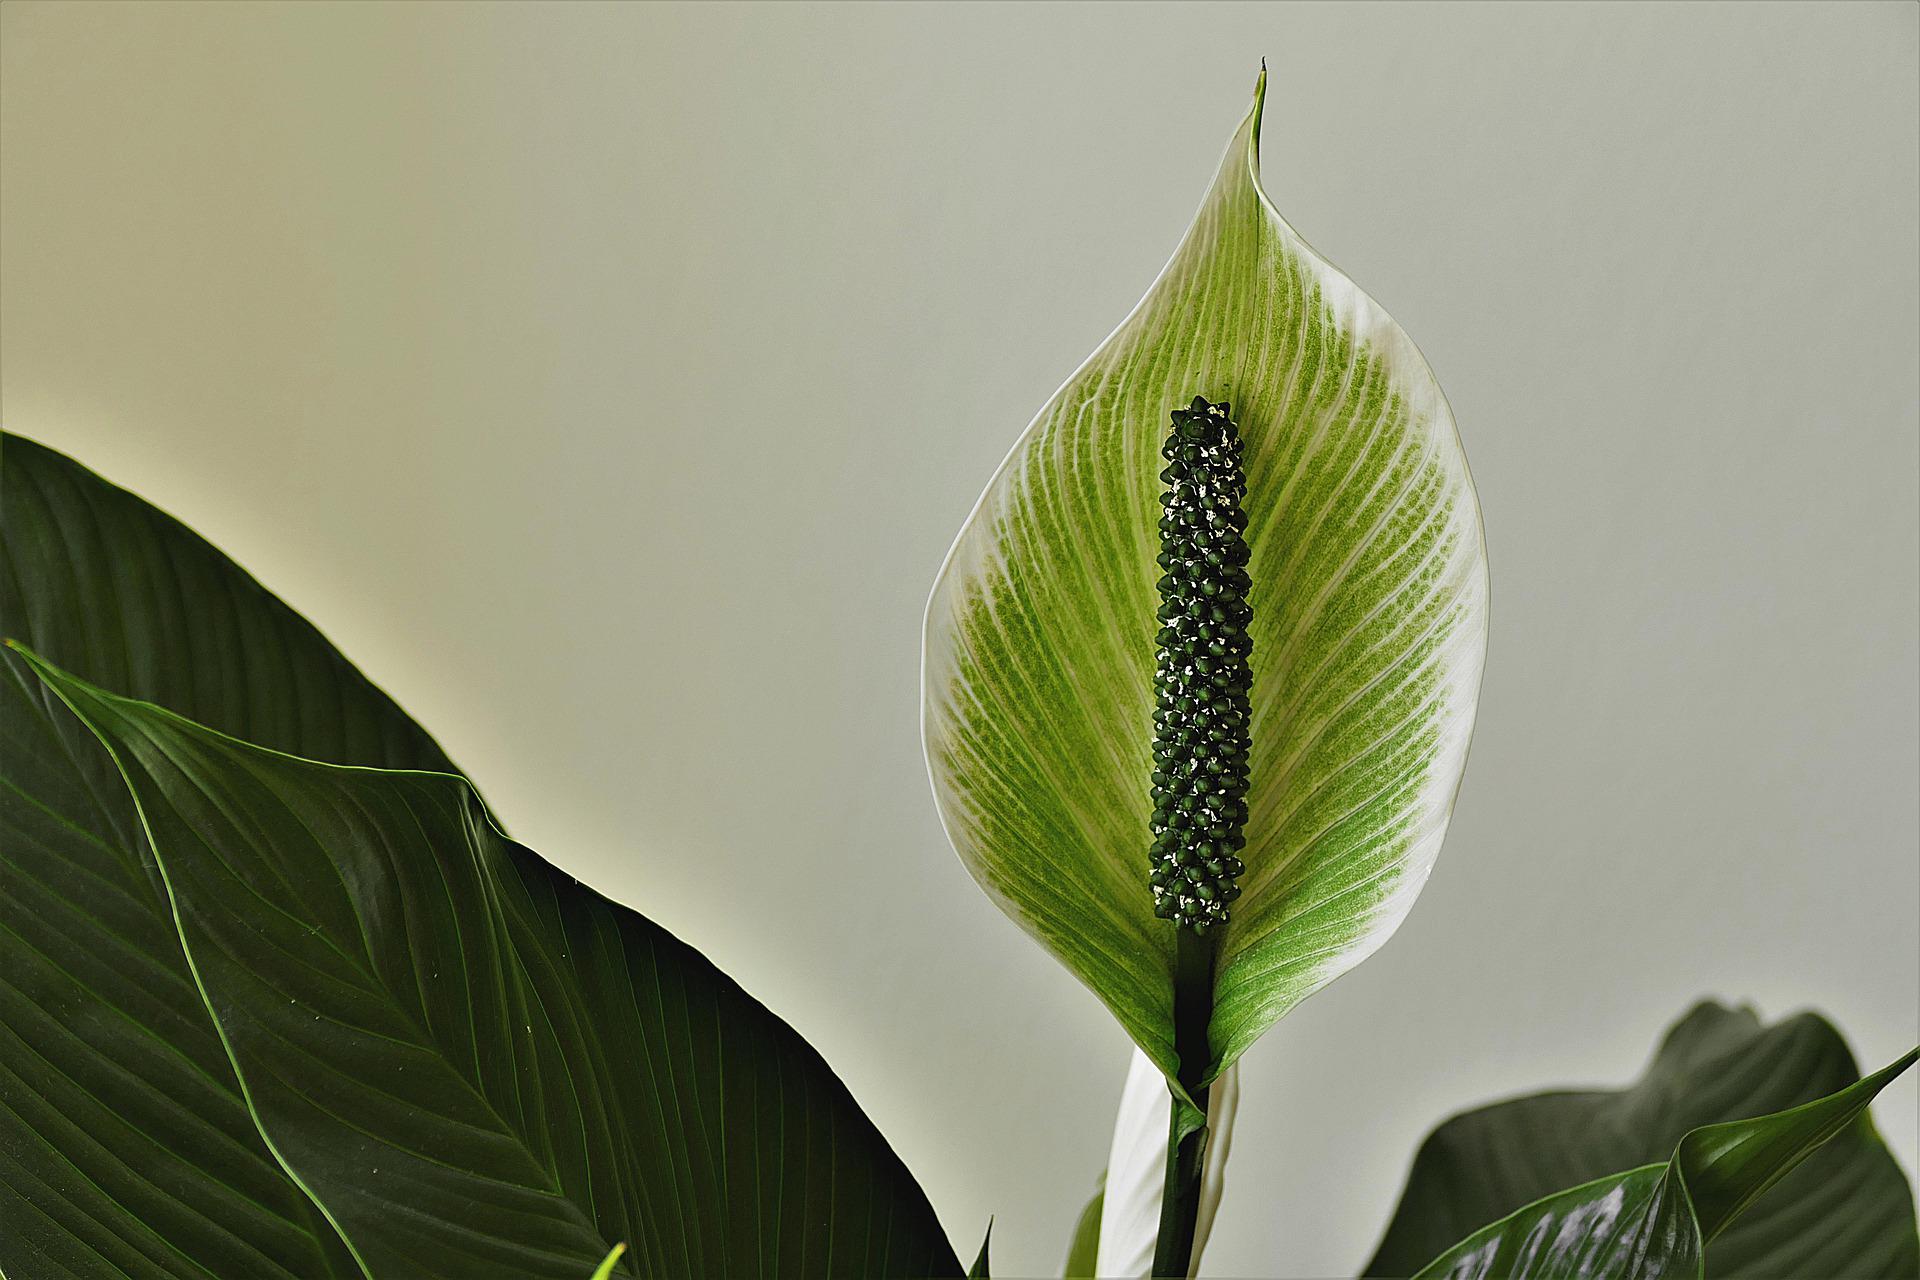 Close up of a peace lily flower, with white and green petal and nobbly green stamen. Dark green leaves show at edges of photo, on a white background.